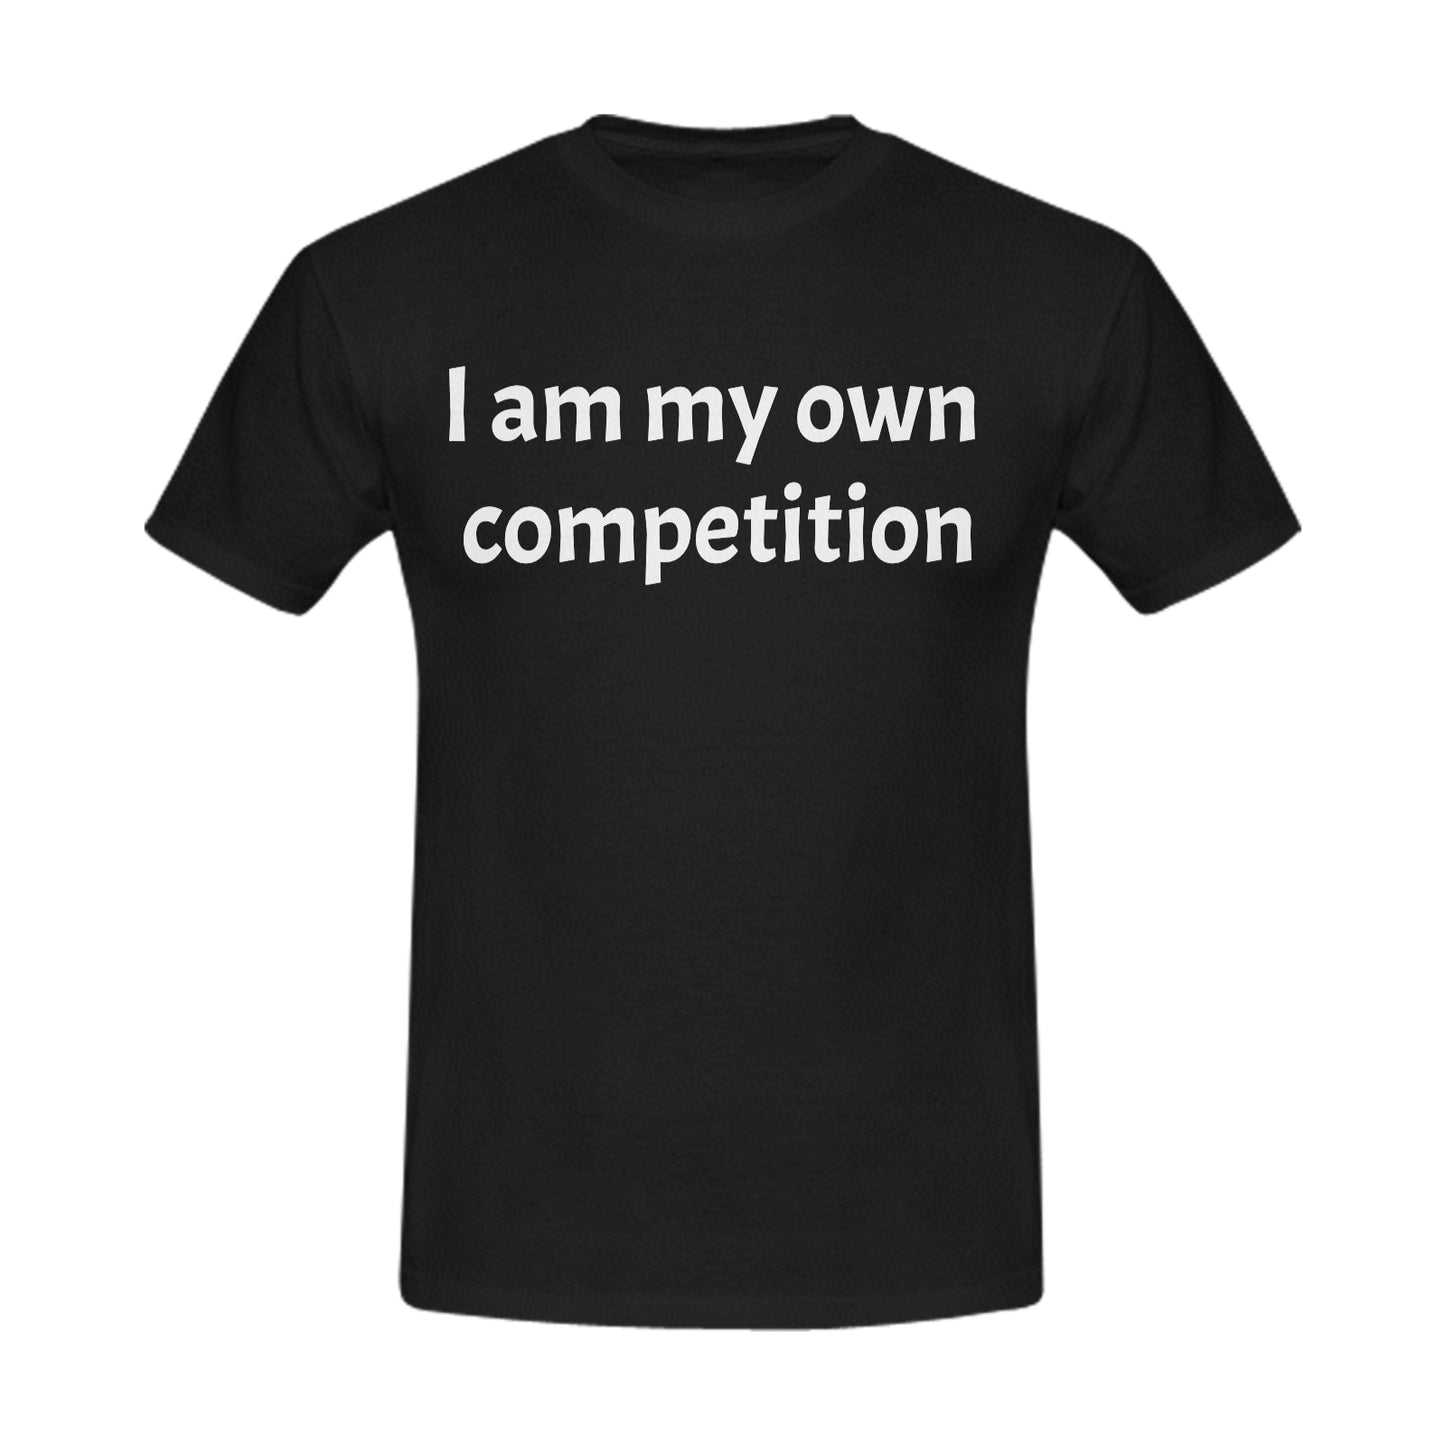 I am my own competition-Men's Slim Fit T-shirt